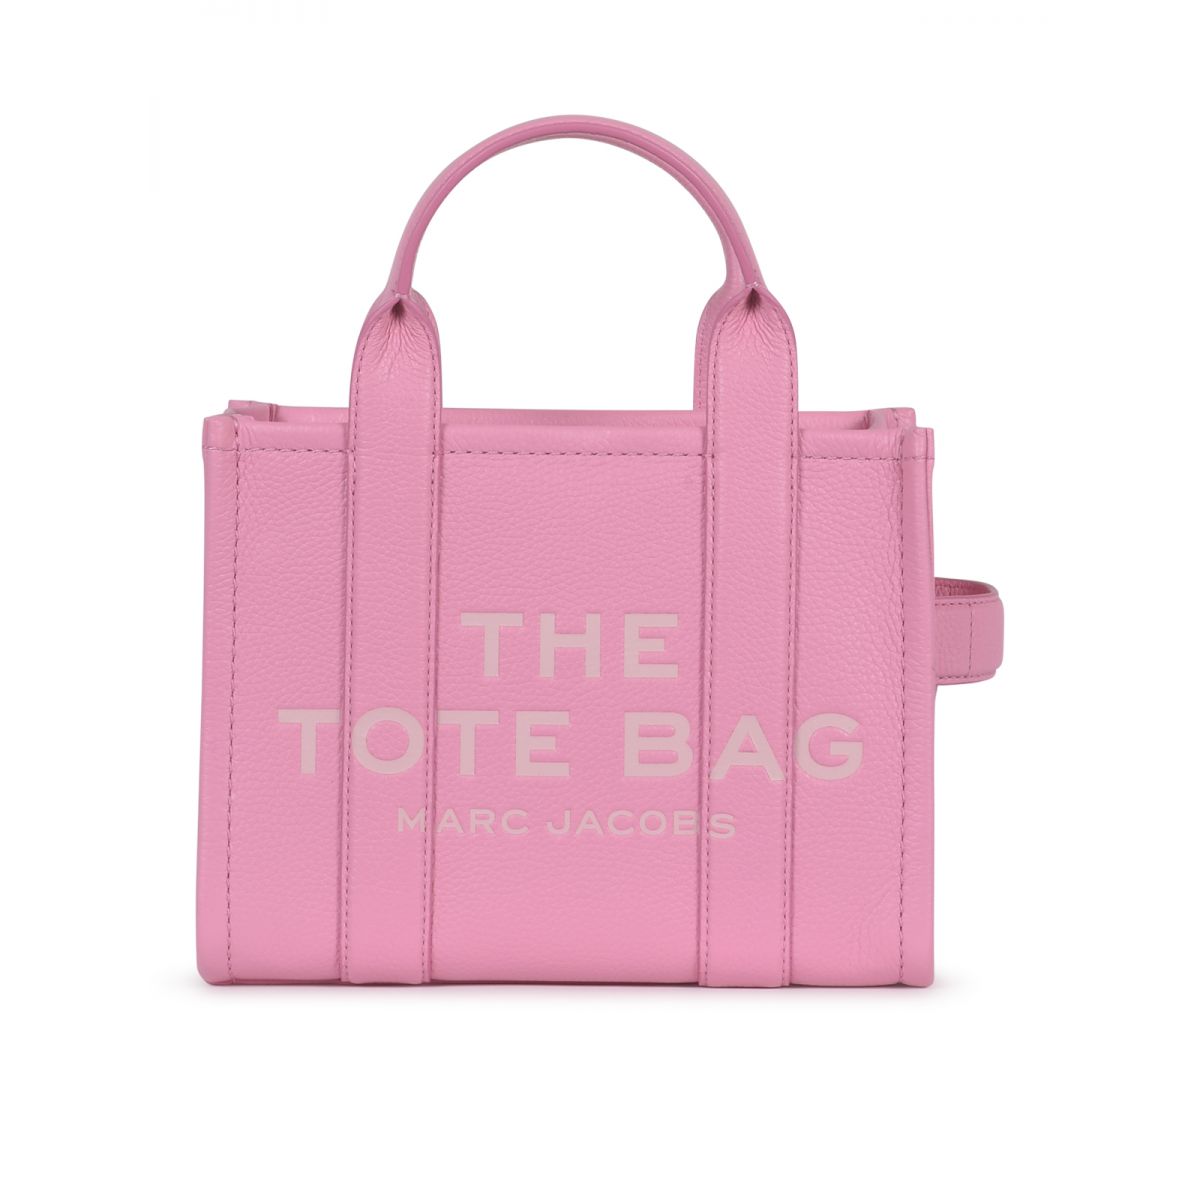 MARC JACOBS - The Small tote bag leather in petal pink